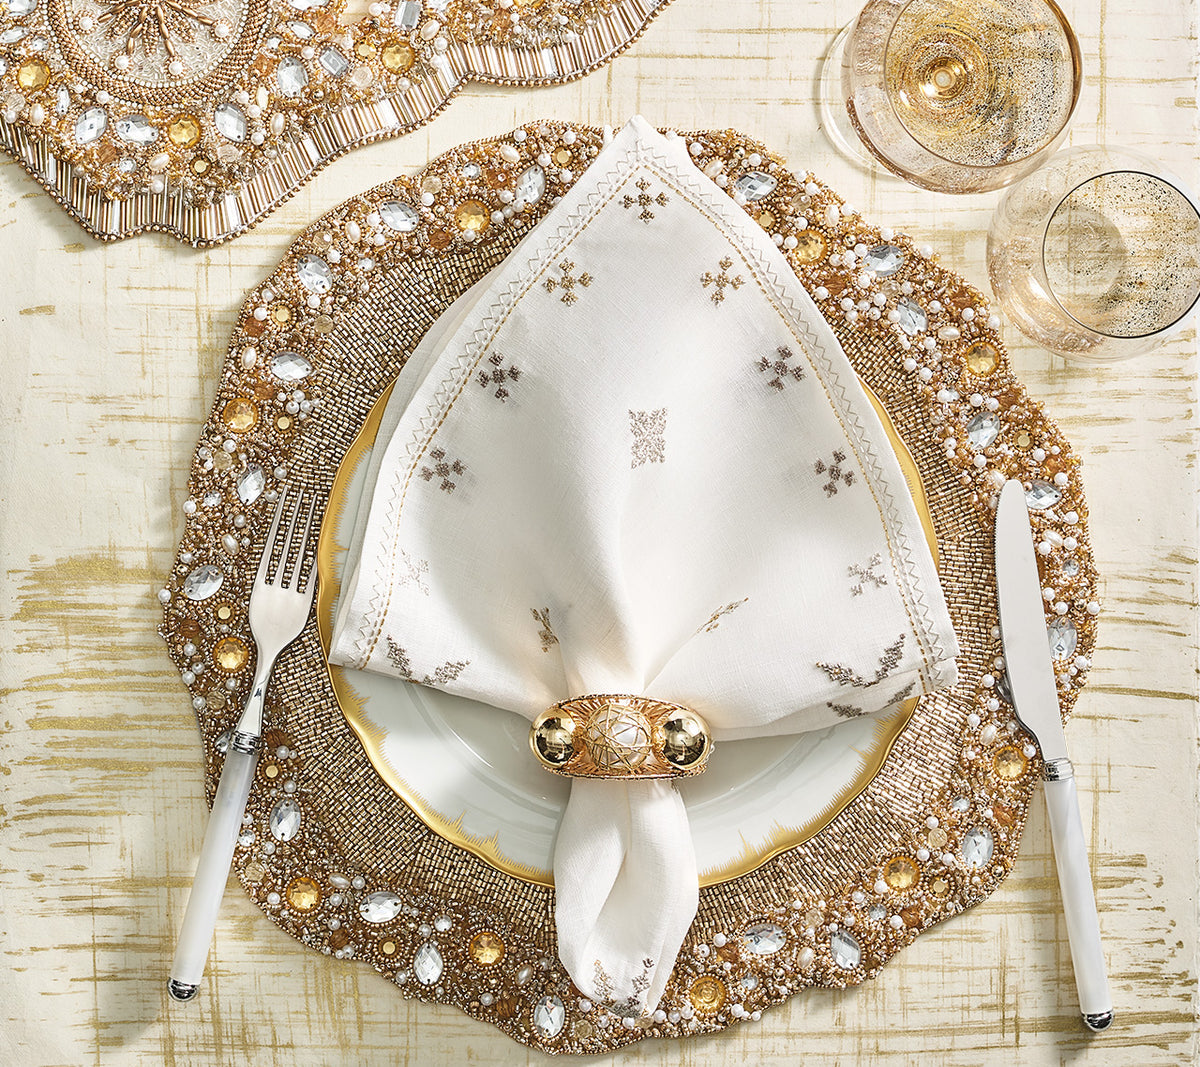 Ornate Table Runner in Champagne & Crystal